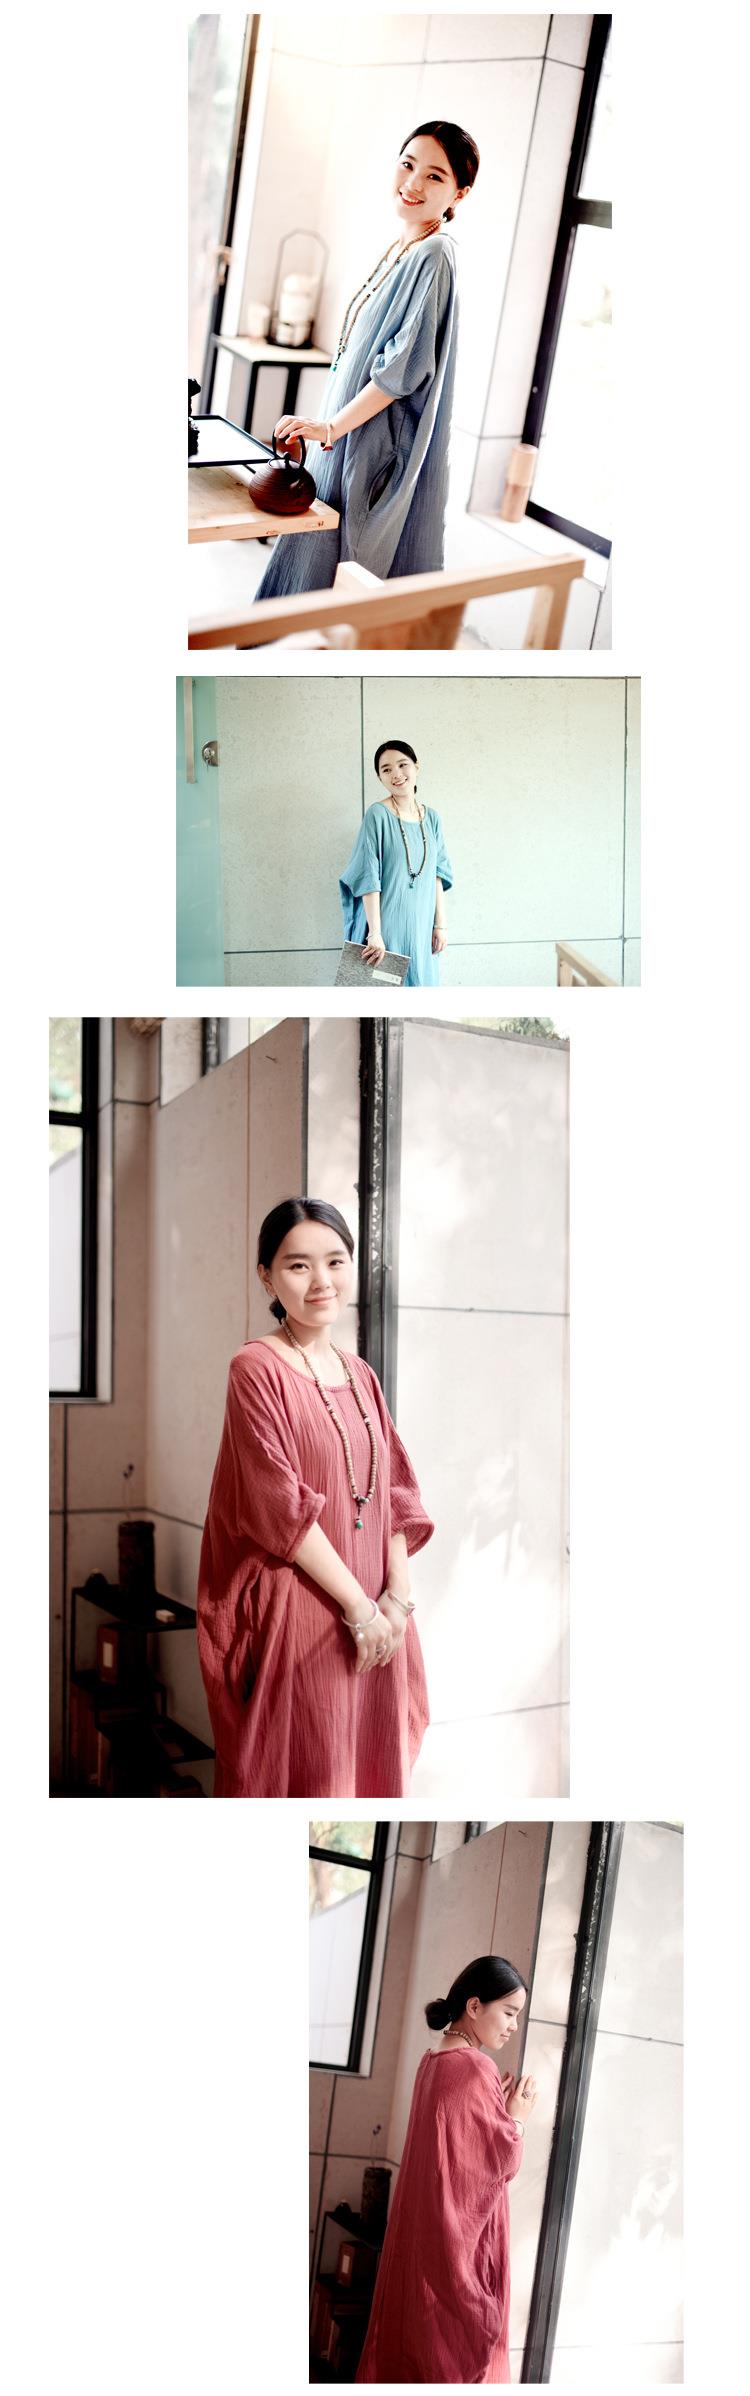 2018-New-Summer-Style-Women-Casual-Maxi-Dress-Cotton-Linen-Batwing-Sleeve-Loose-Plus-Size-Robe-Half--32374026851